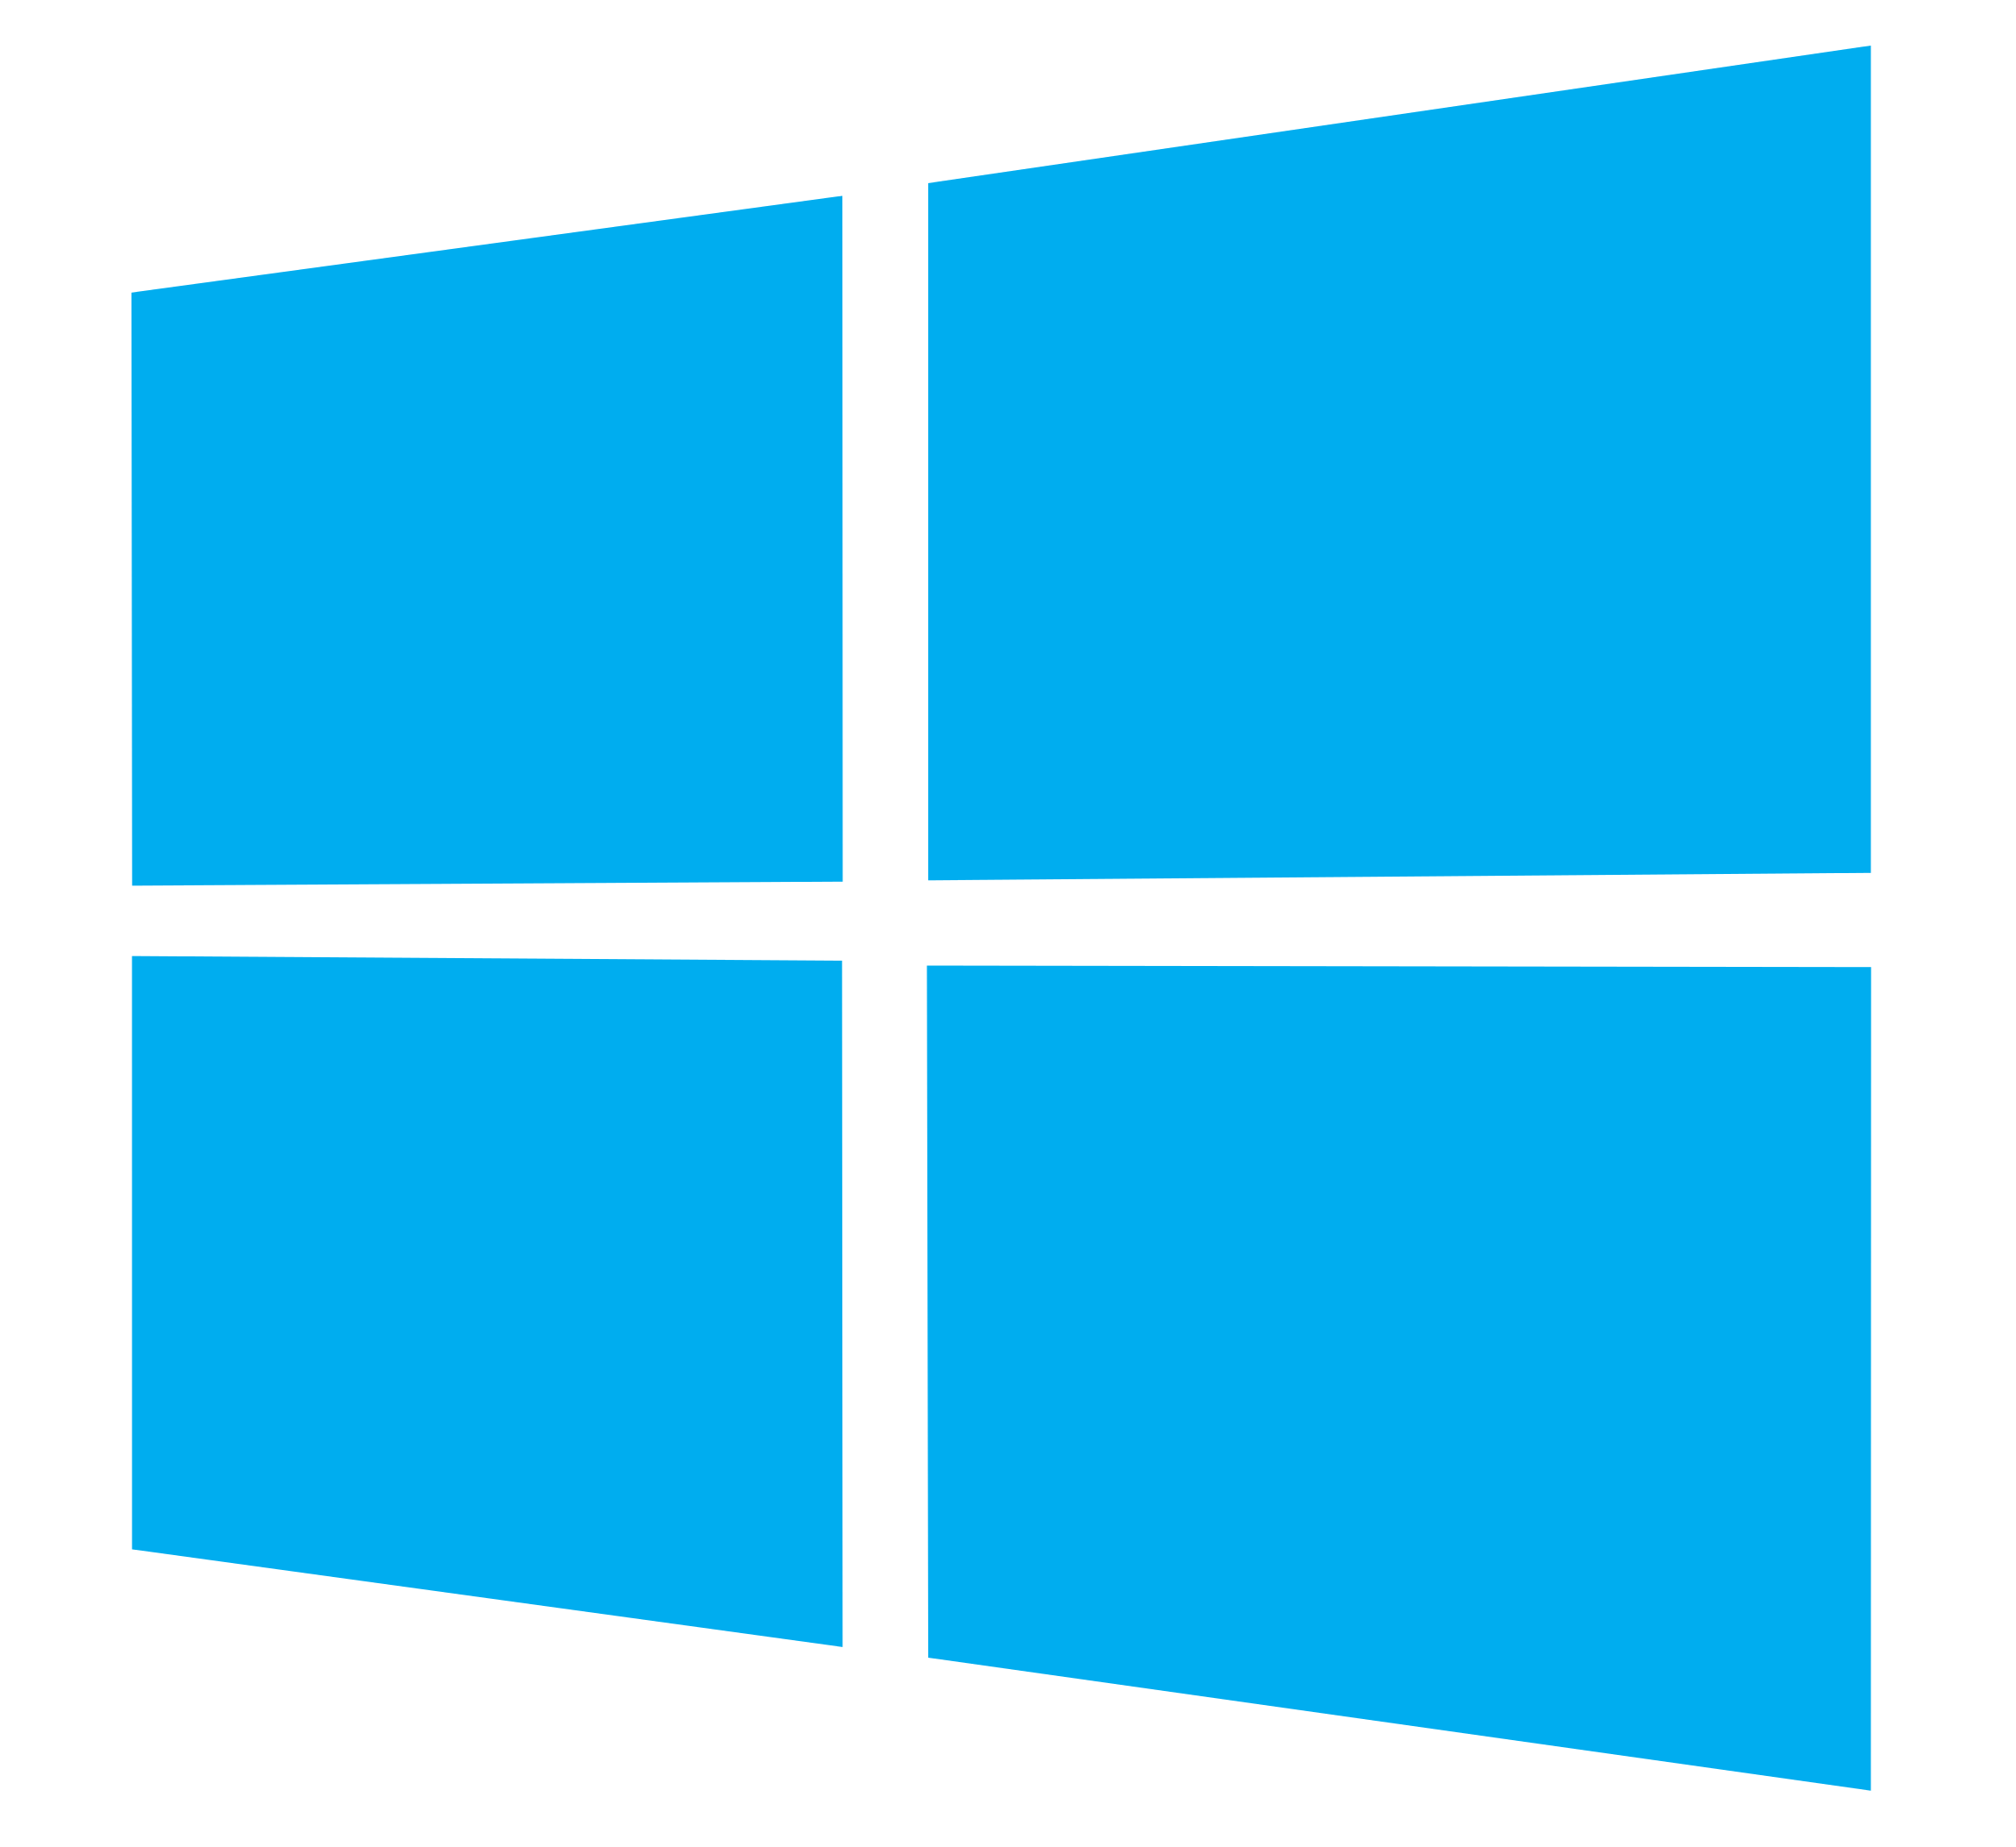 Windows 4 Logo - Windows Logo, Windows Symbol, Meaning, History and Evolution